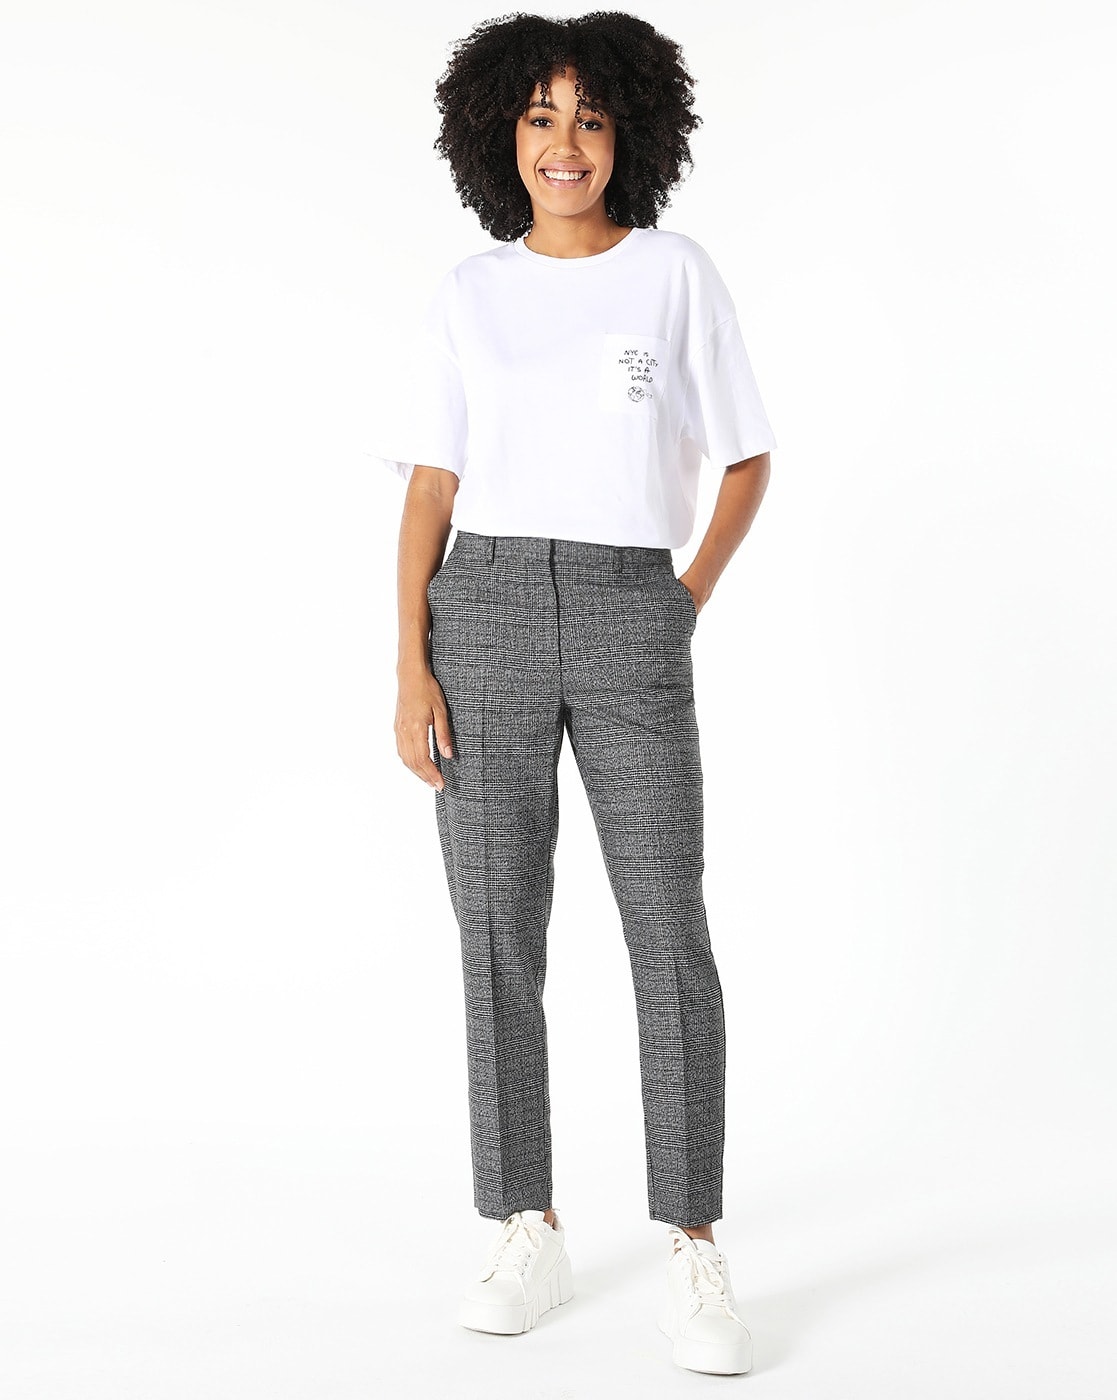 Massimo Dutti Checked Wide-Leg Trousers in Grey | Grey pants outfit,  Trousers outfit women, Checked trousers outfit